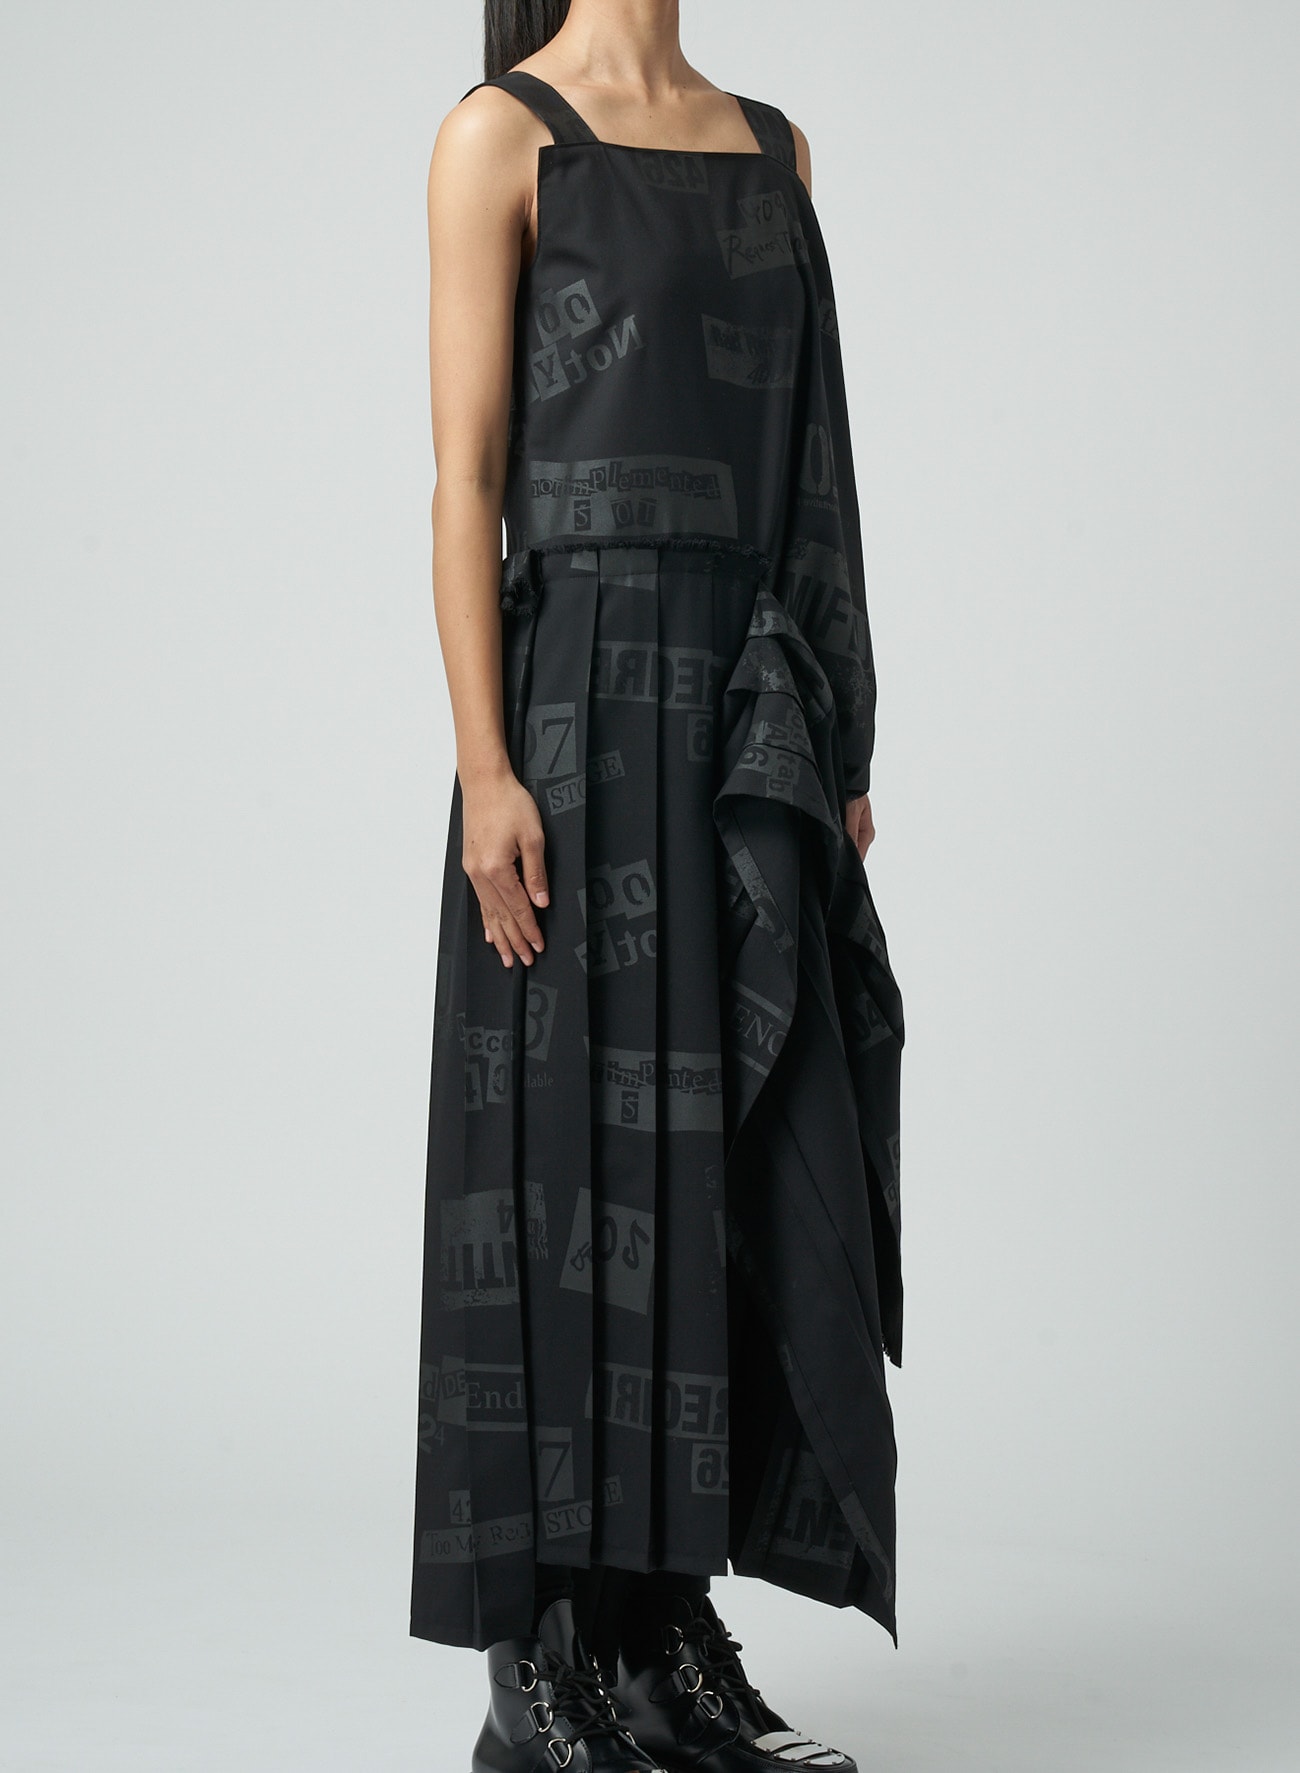 PRINTED SERGE DRESS WITH PLEATED SKIRT